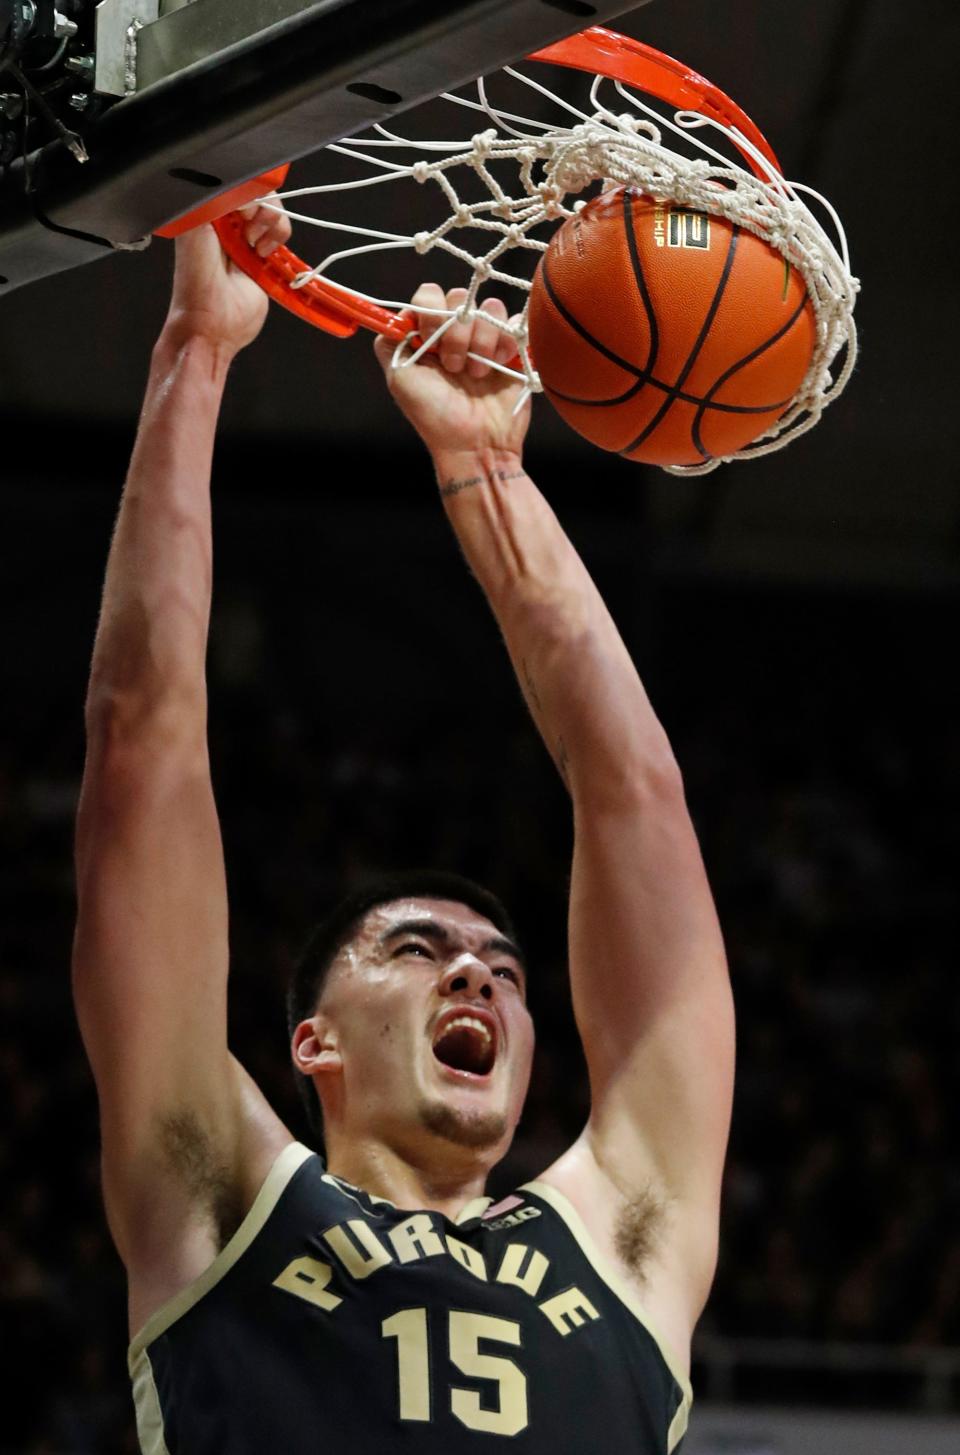 Purdue Boilermakers center Zach Edey (15) dunks the ball during the NCAA men’s basketball game against the Marquette Golden Eagles, Tuesday, Nov. 15, 2022, at Mackey Arena in West Lafayette, Ind. Purdue won 75-70.